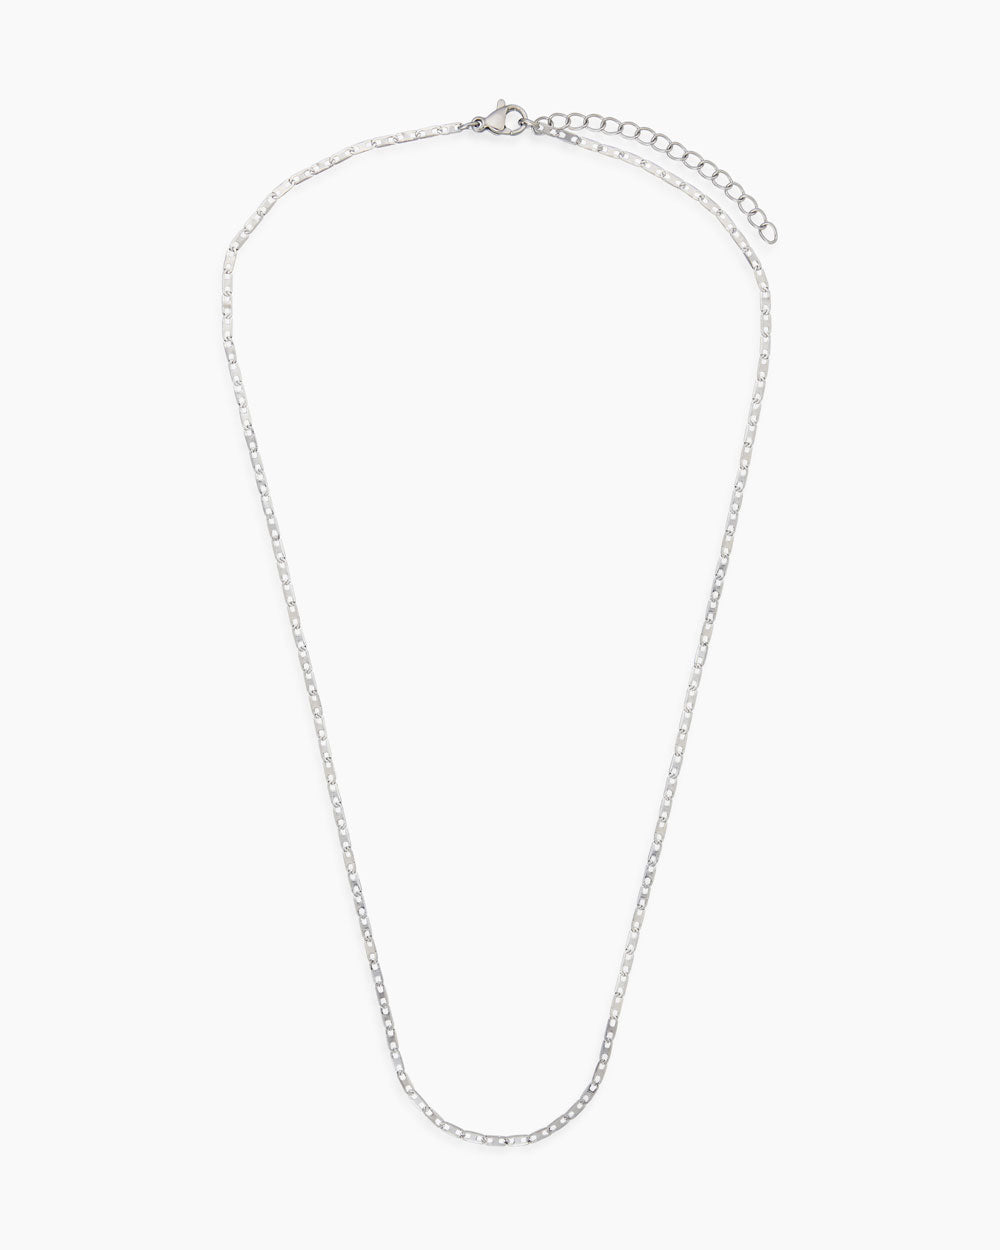 Blake Silver Necklace - Penny Pairs